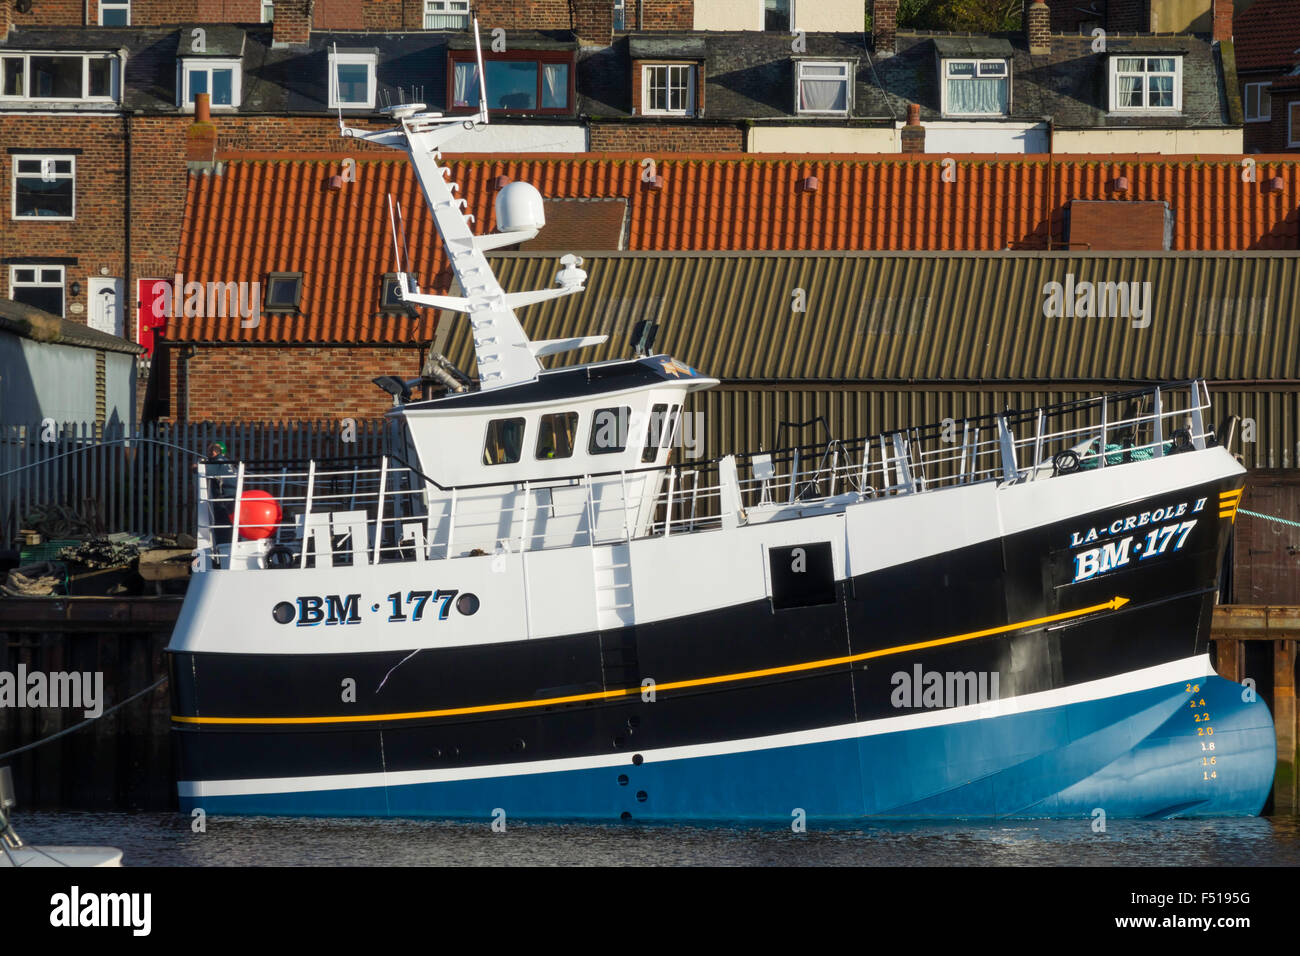 Newly completed specialised crab fishing boat La Creole ll BM 177 moored at the Parkol shipbuilding yard at Whitby, North Yorks. Stock Photo